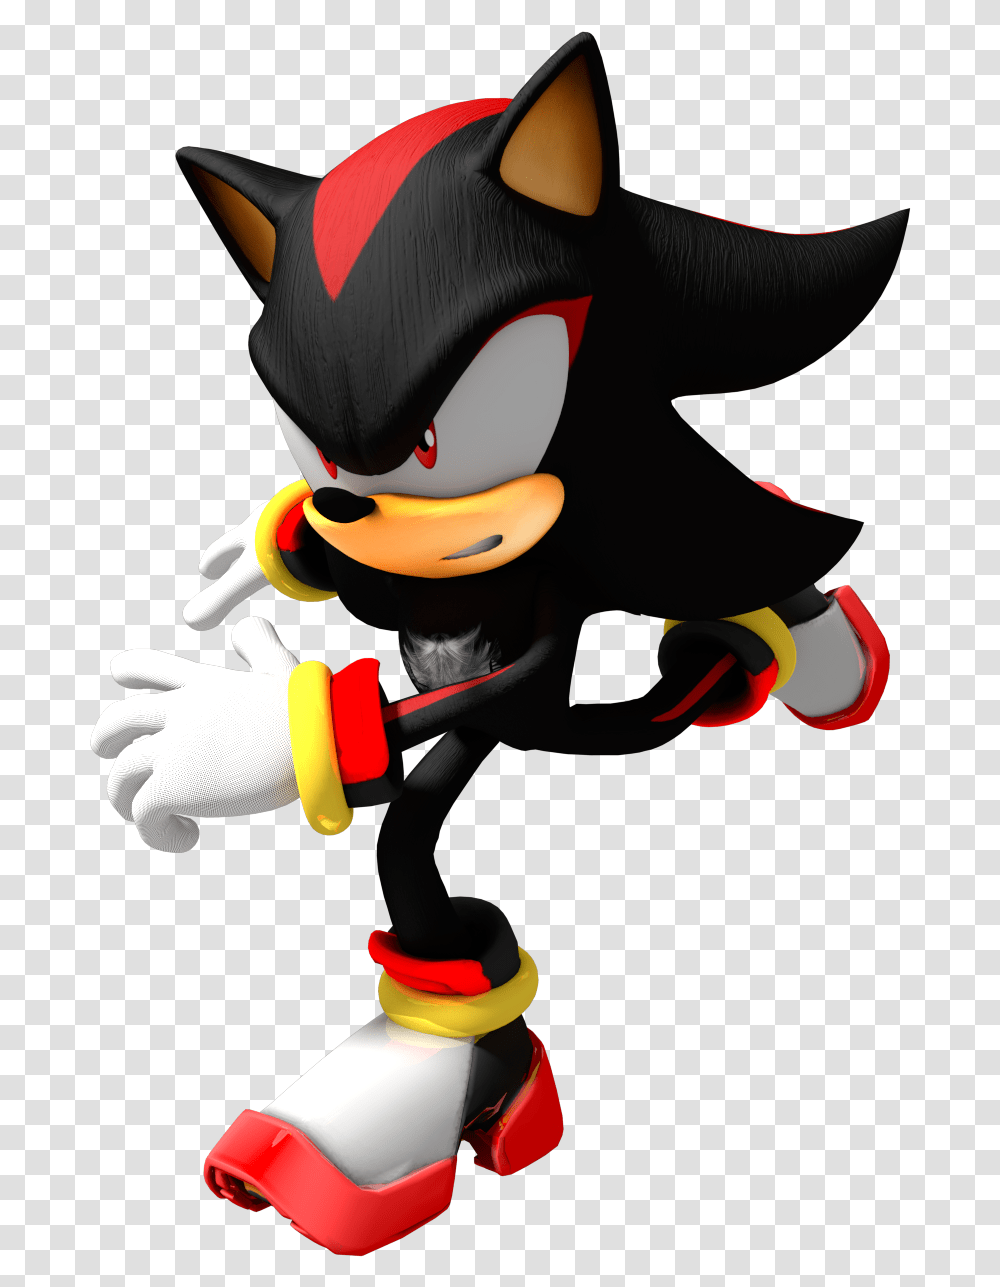 Hd Download Shadow The Hedgehog Angry, Toy, Performer, Clown Transparent Png